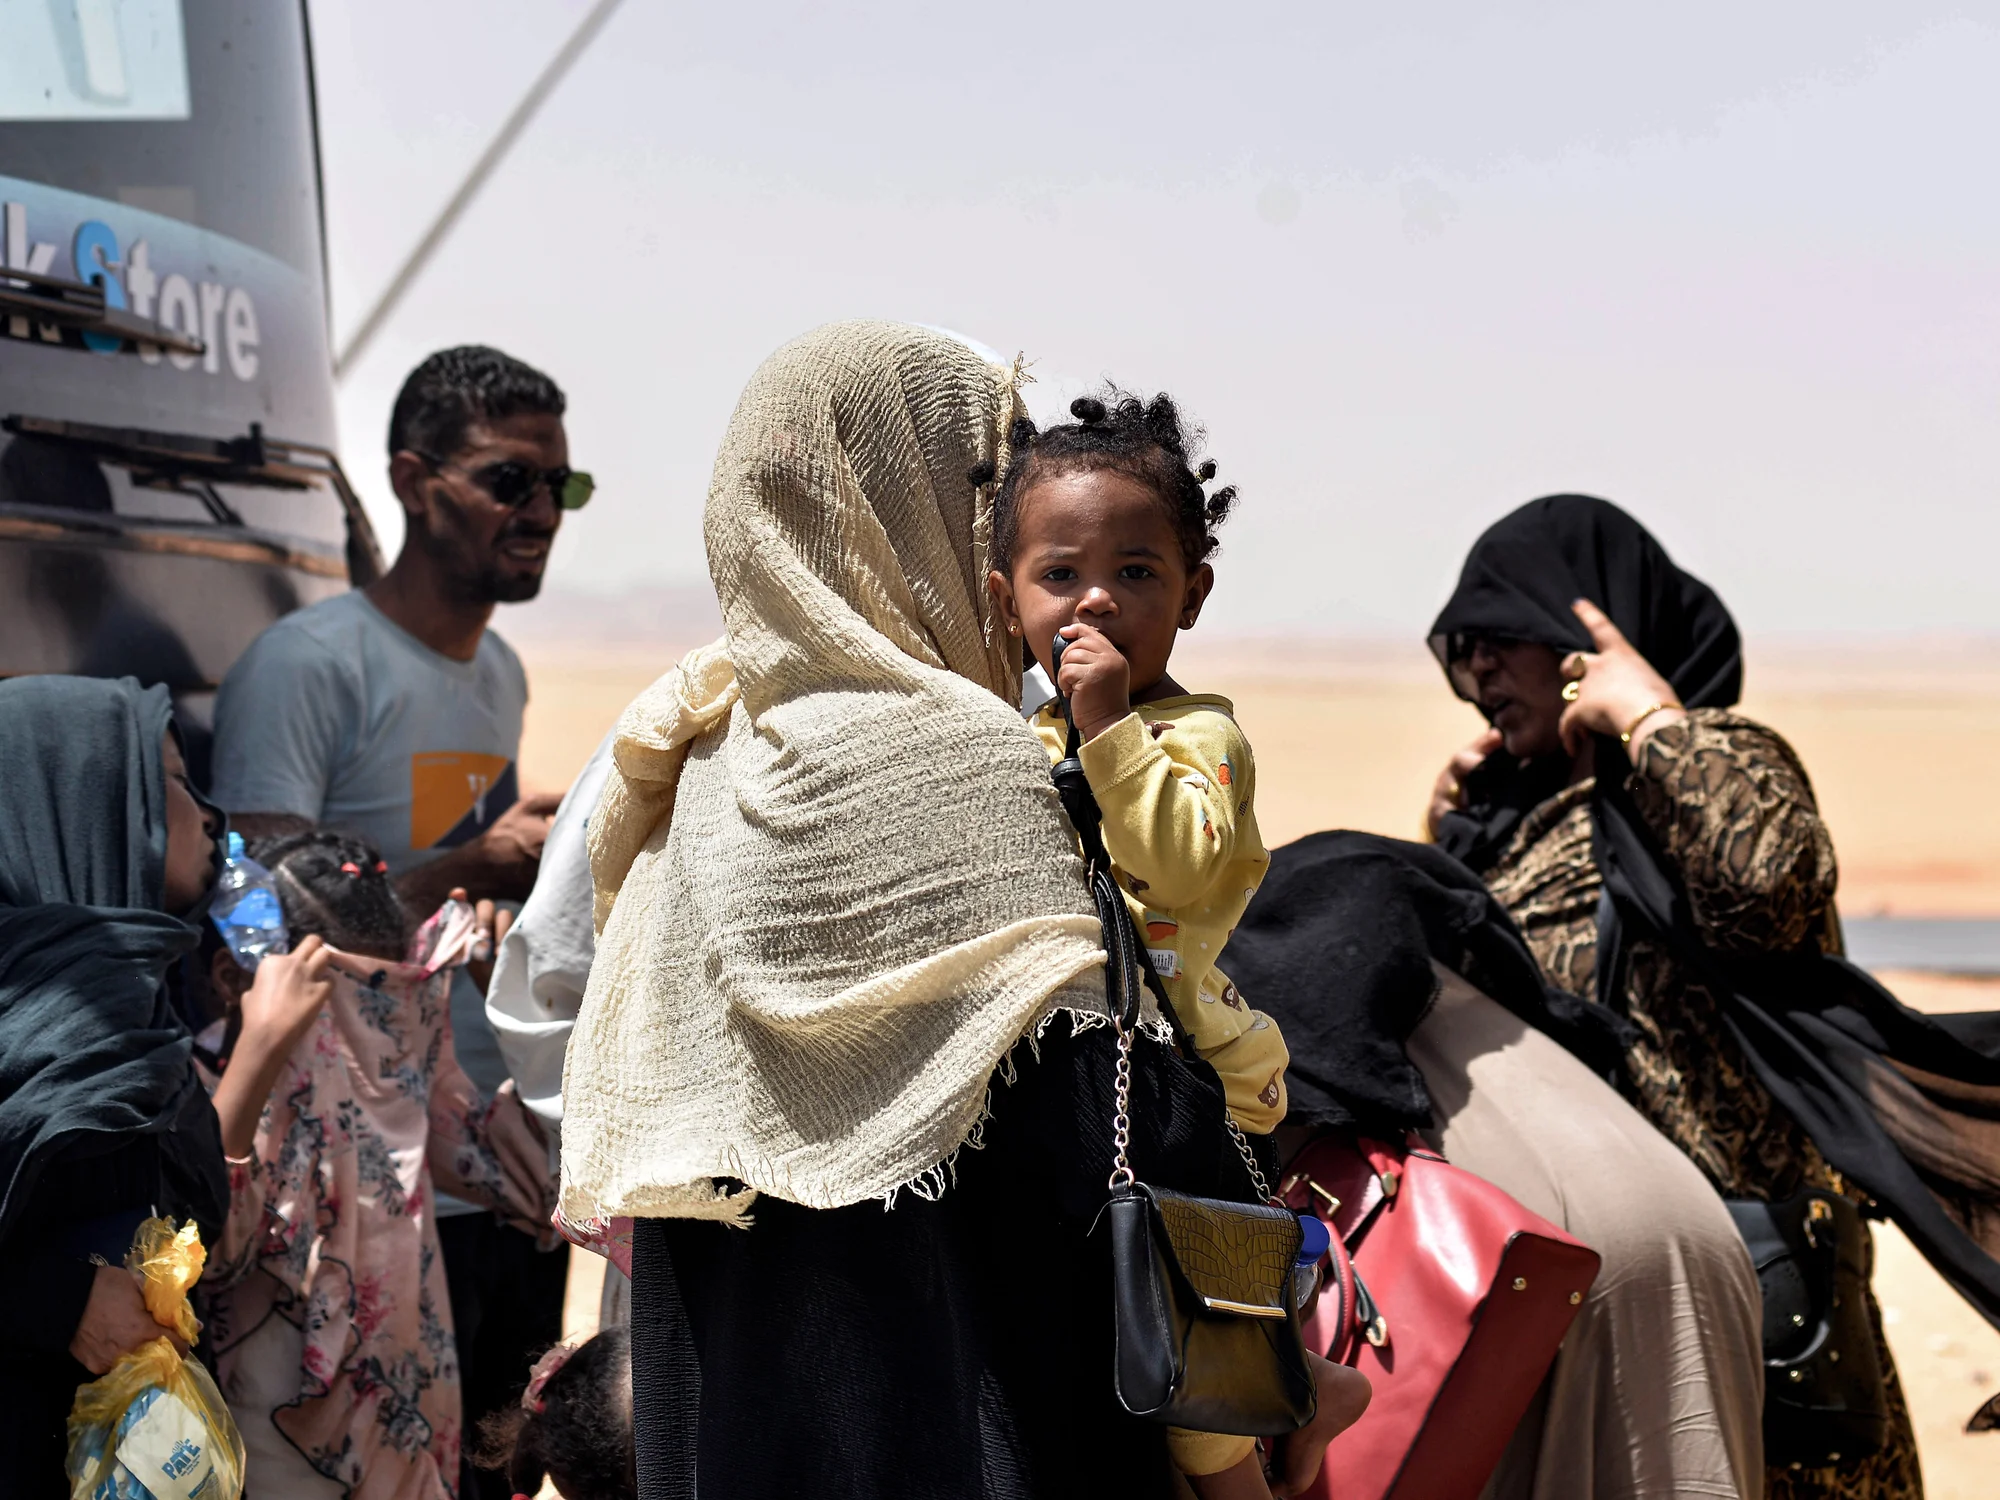 image-of-families-of-sudanese-refugees-with-their-children-arriving-into-egypt